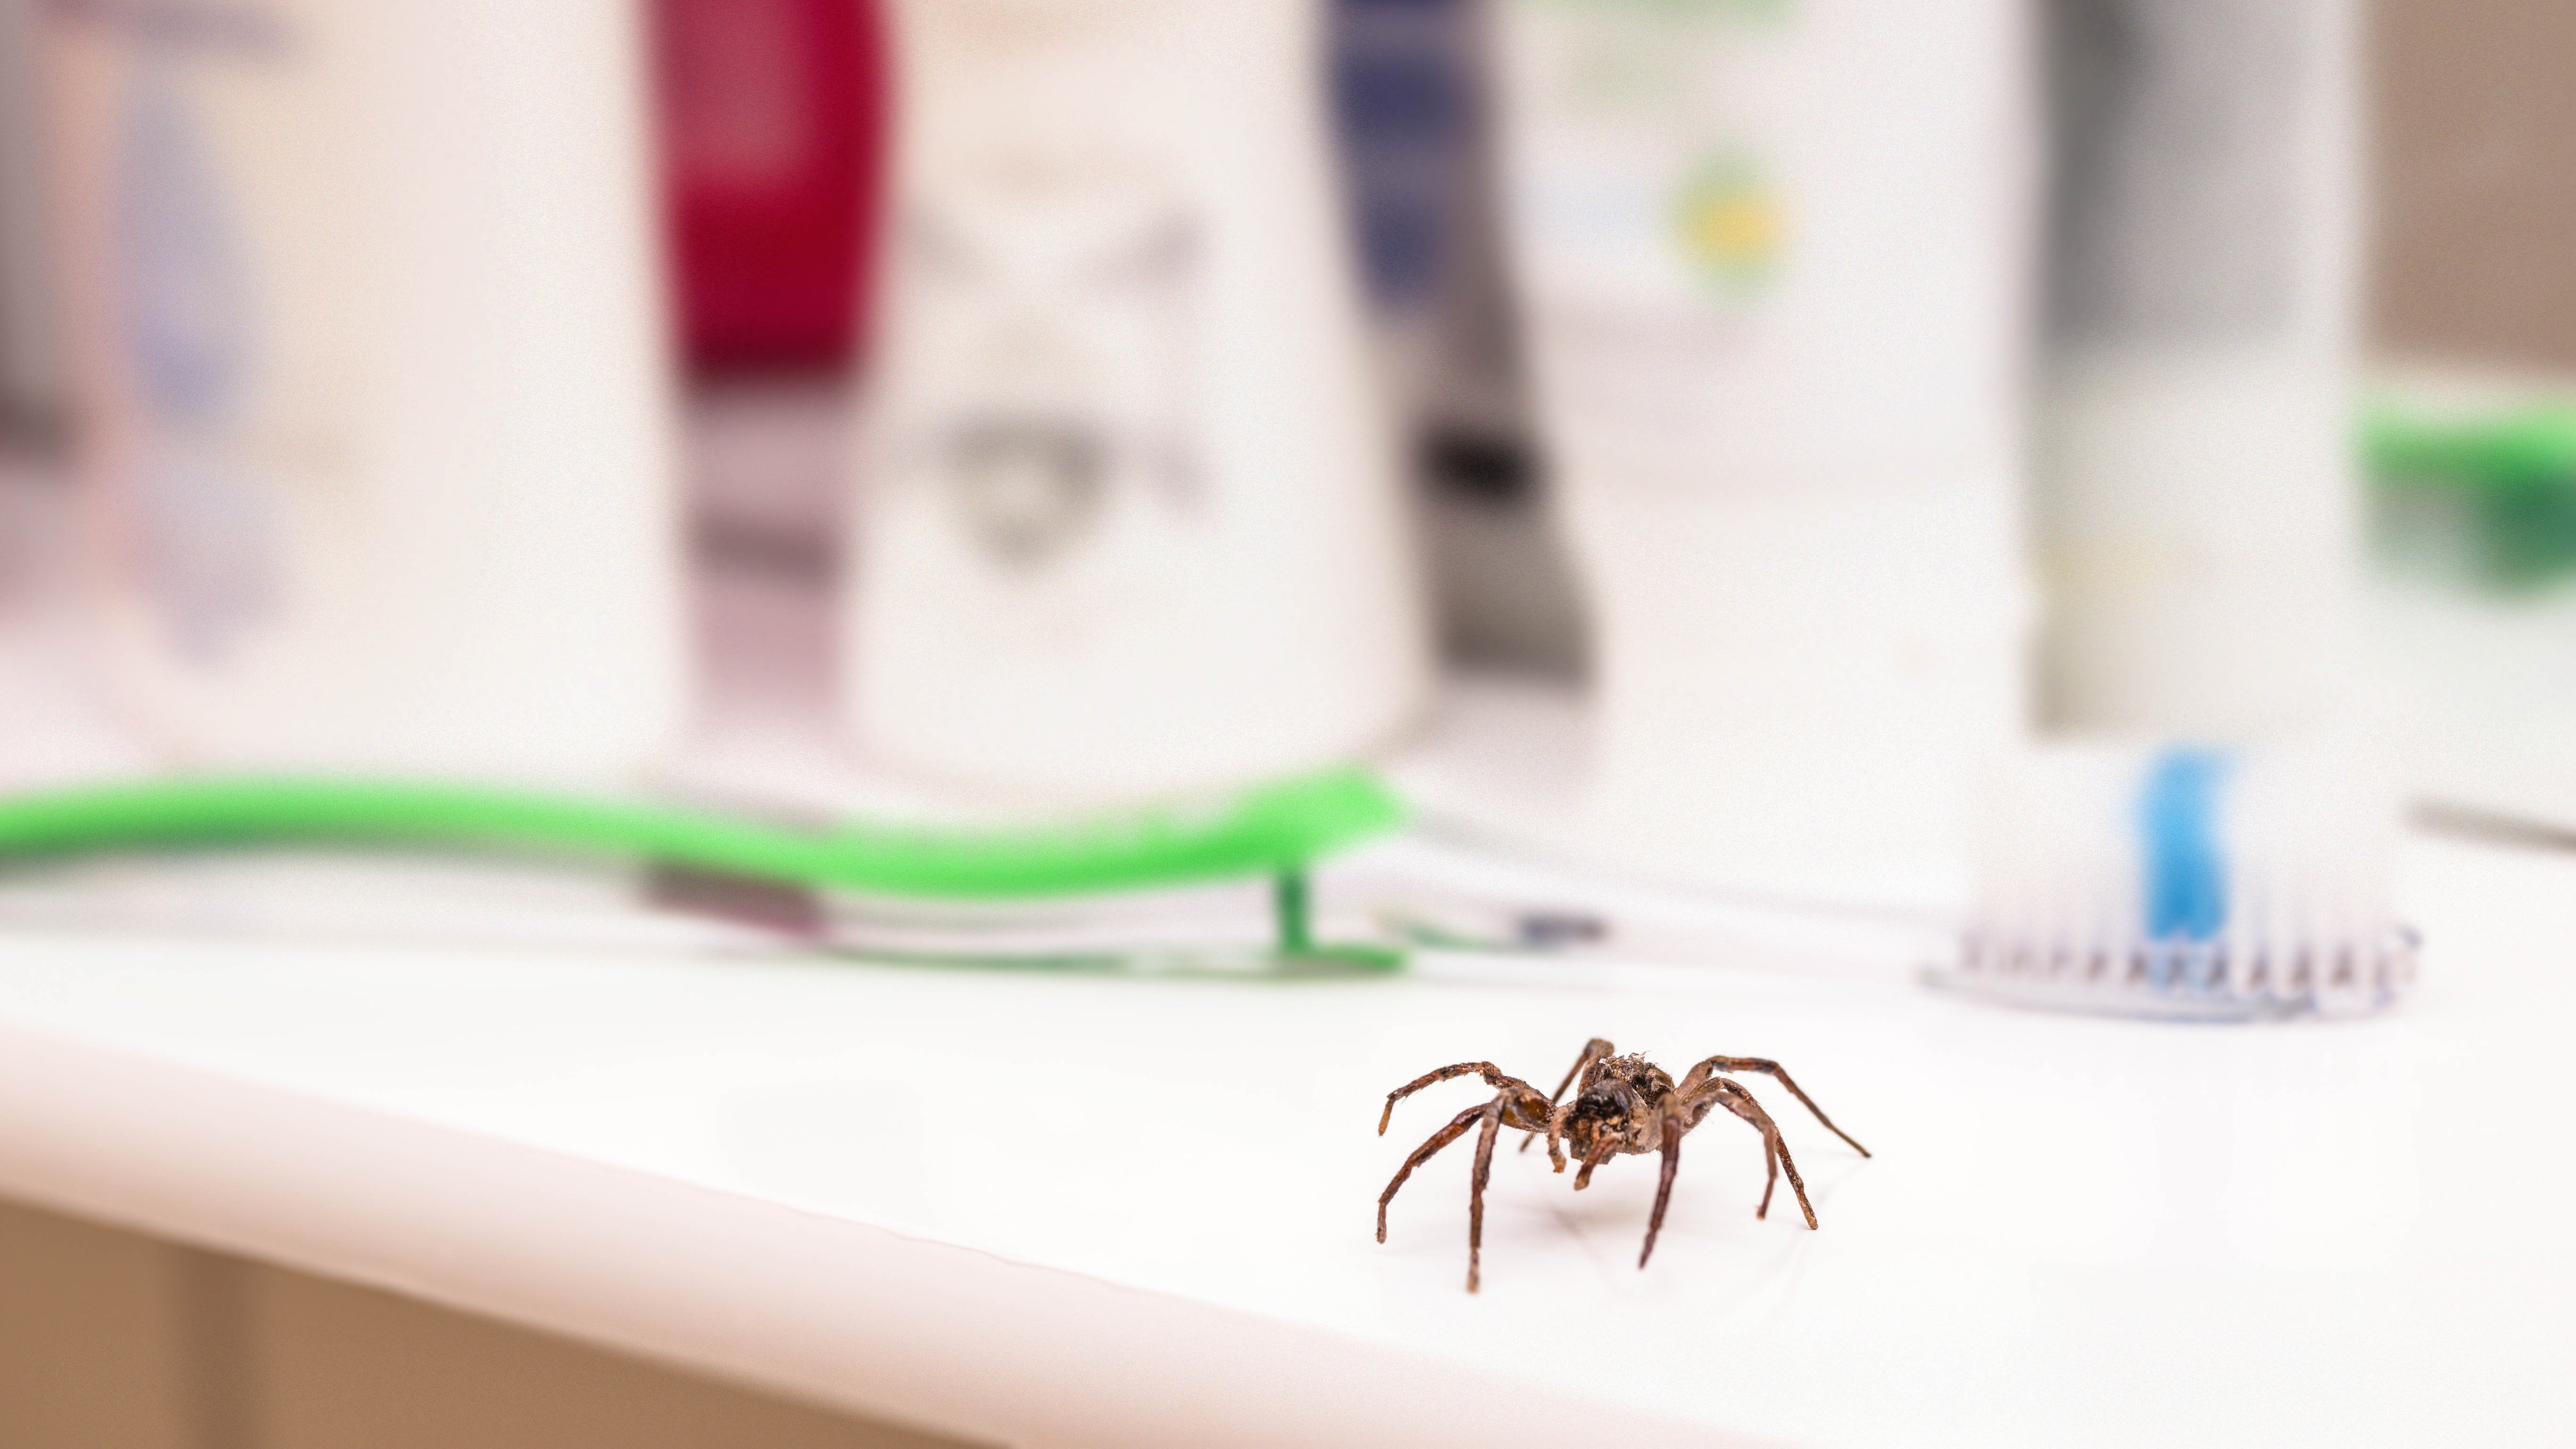 A spider on a bathroom cabinet next to a toothbrush